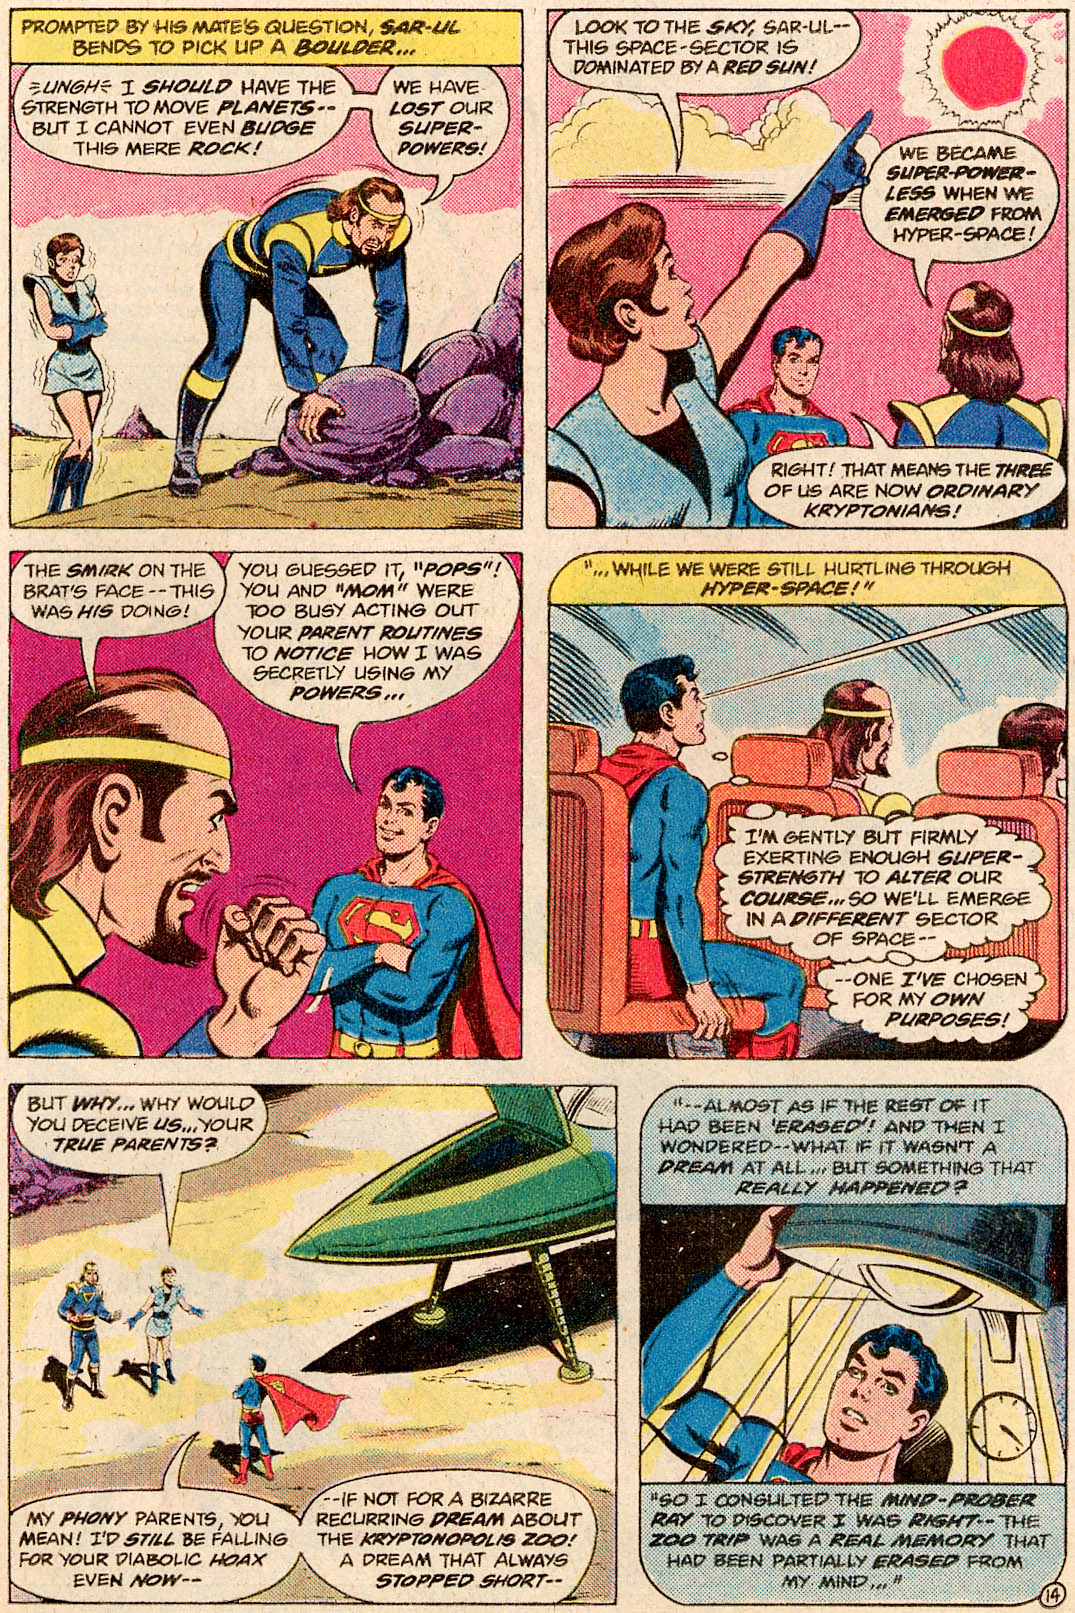 The New Adventures of Superboy 28 Page 14